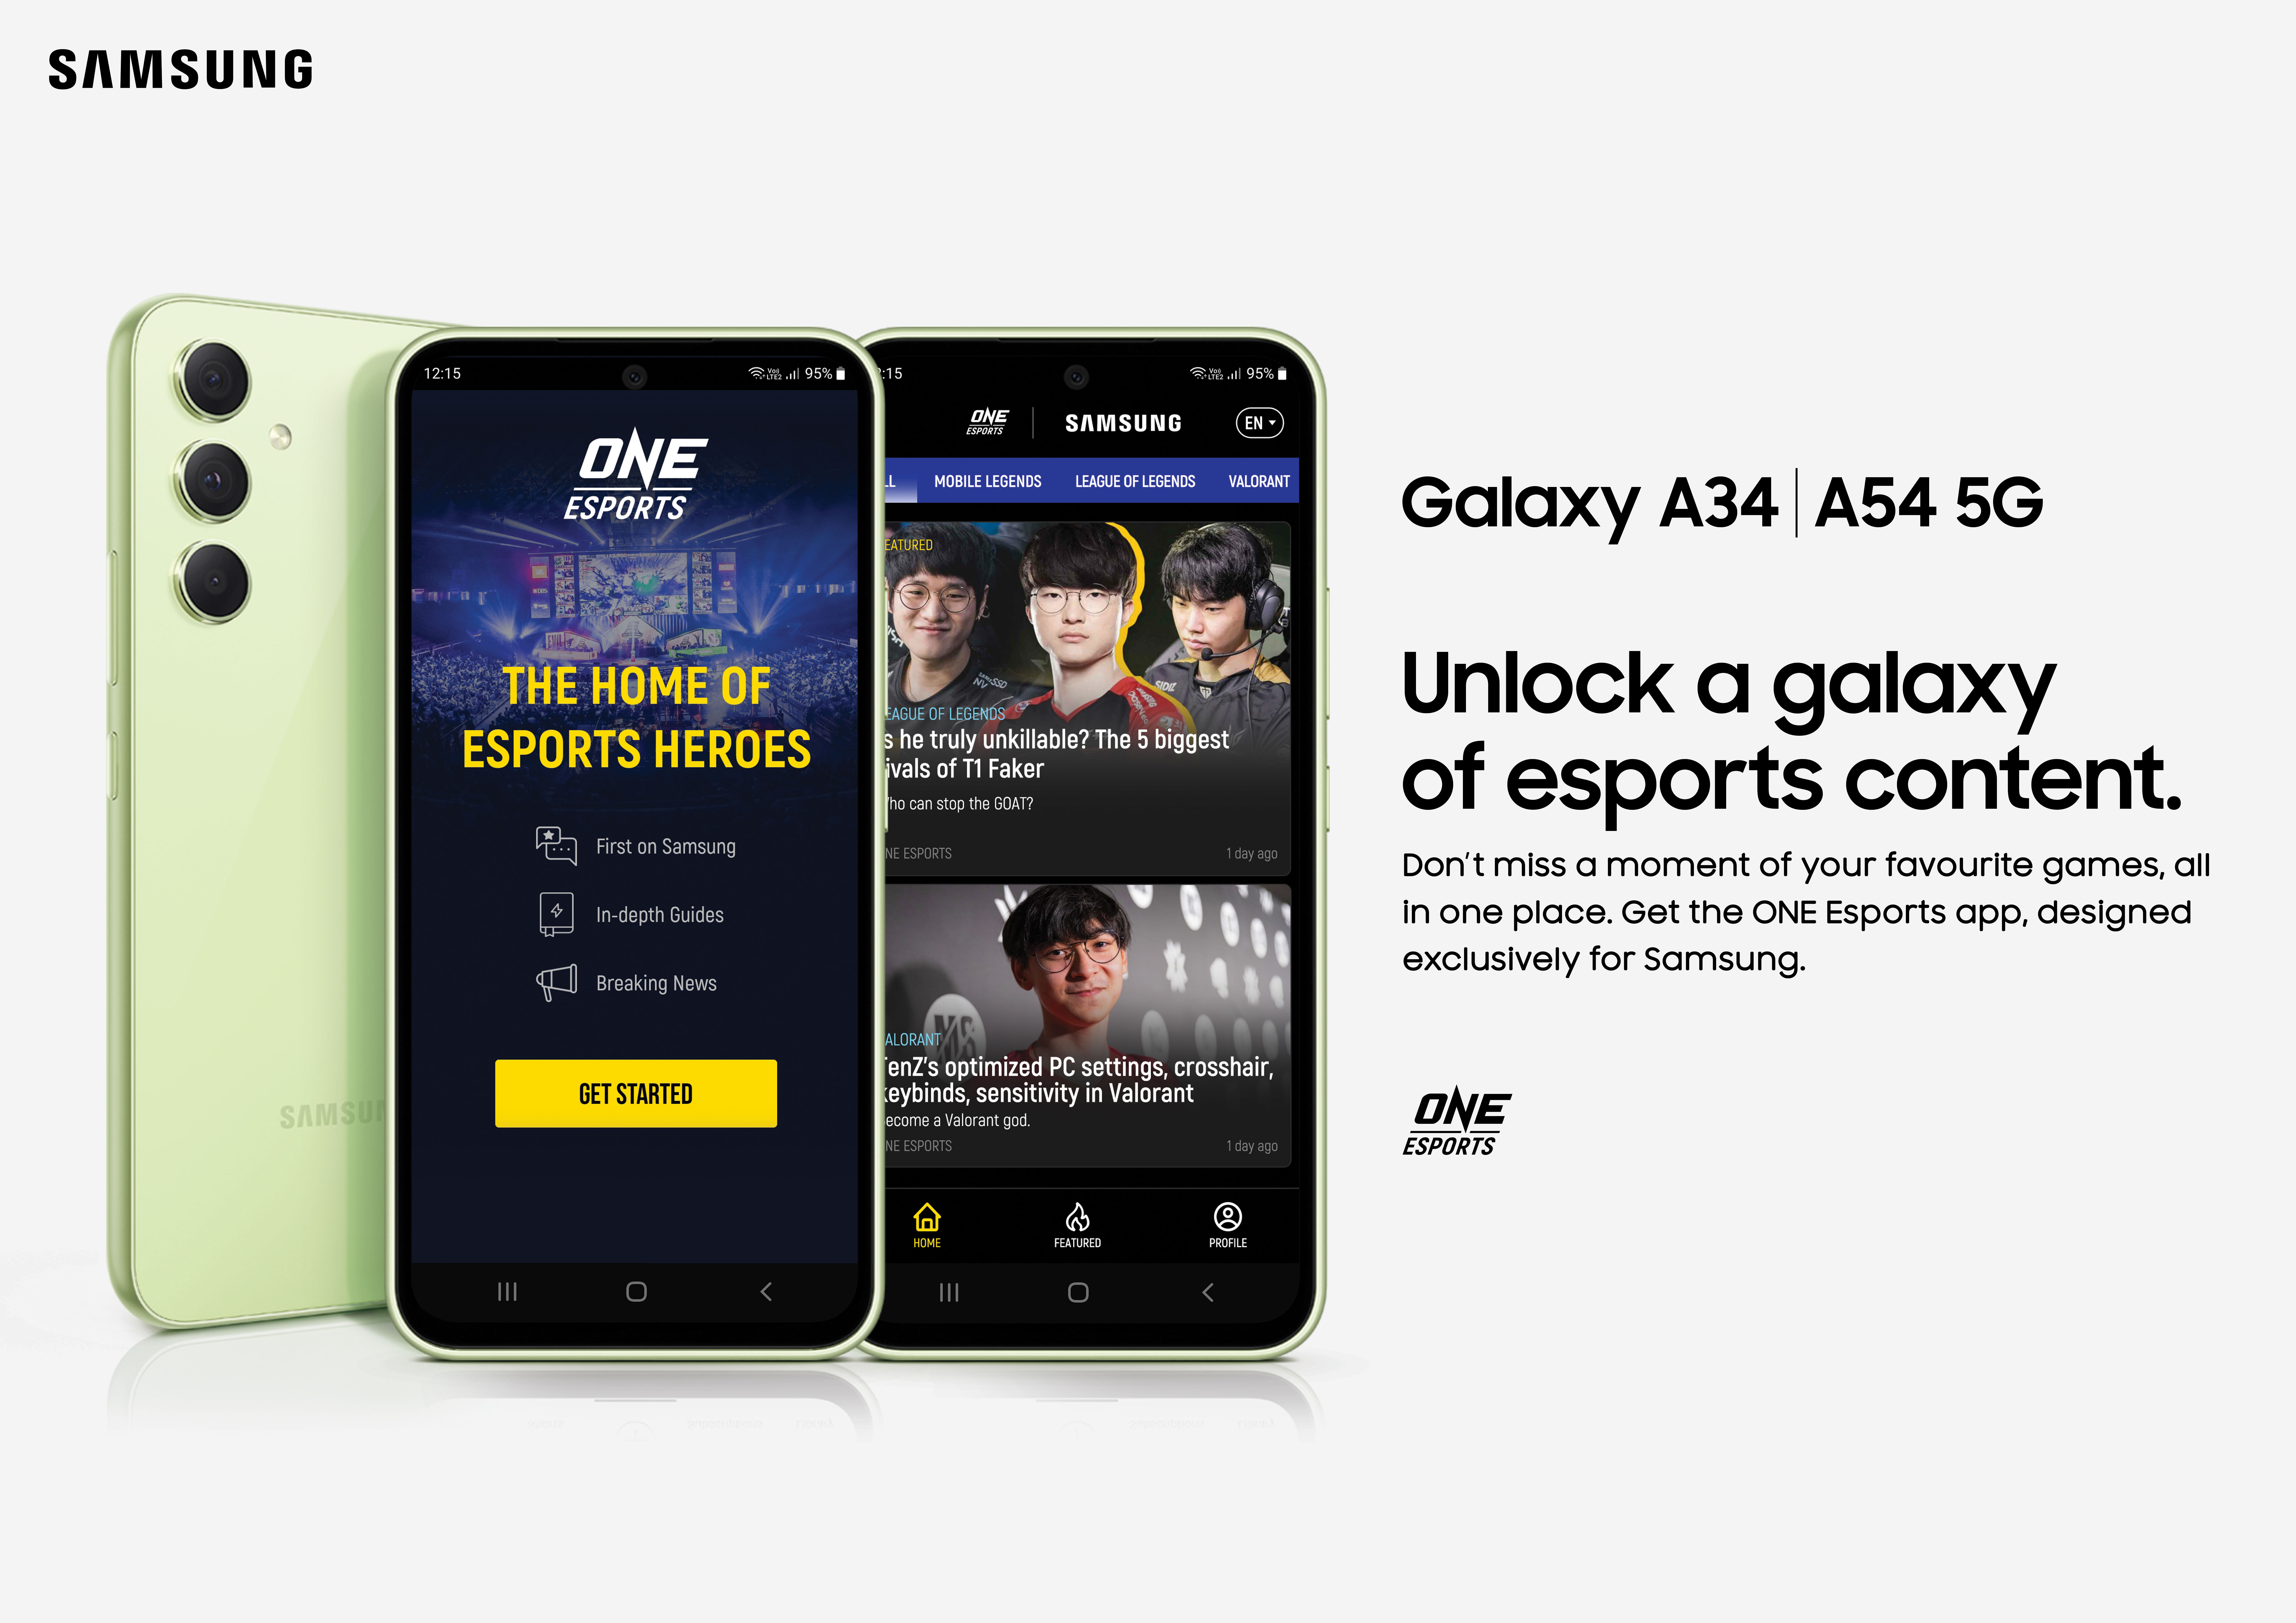 Samsung has released an esports app exclusive to Galaxy phones